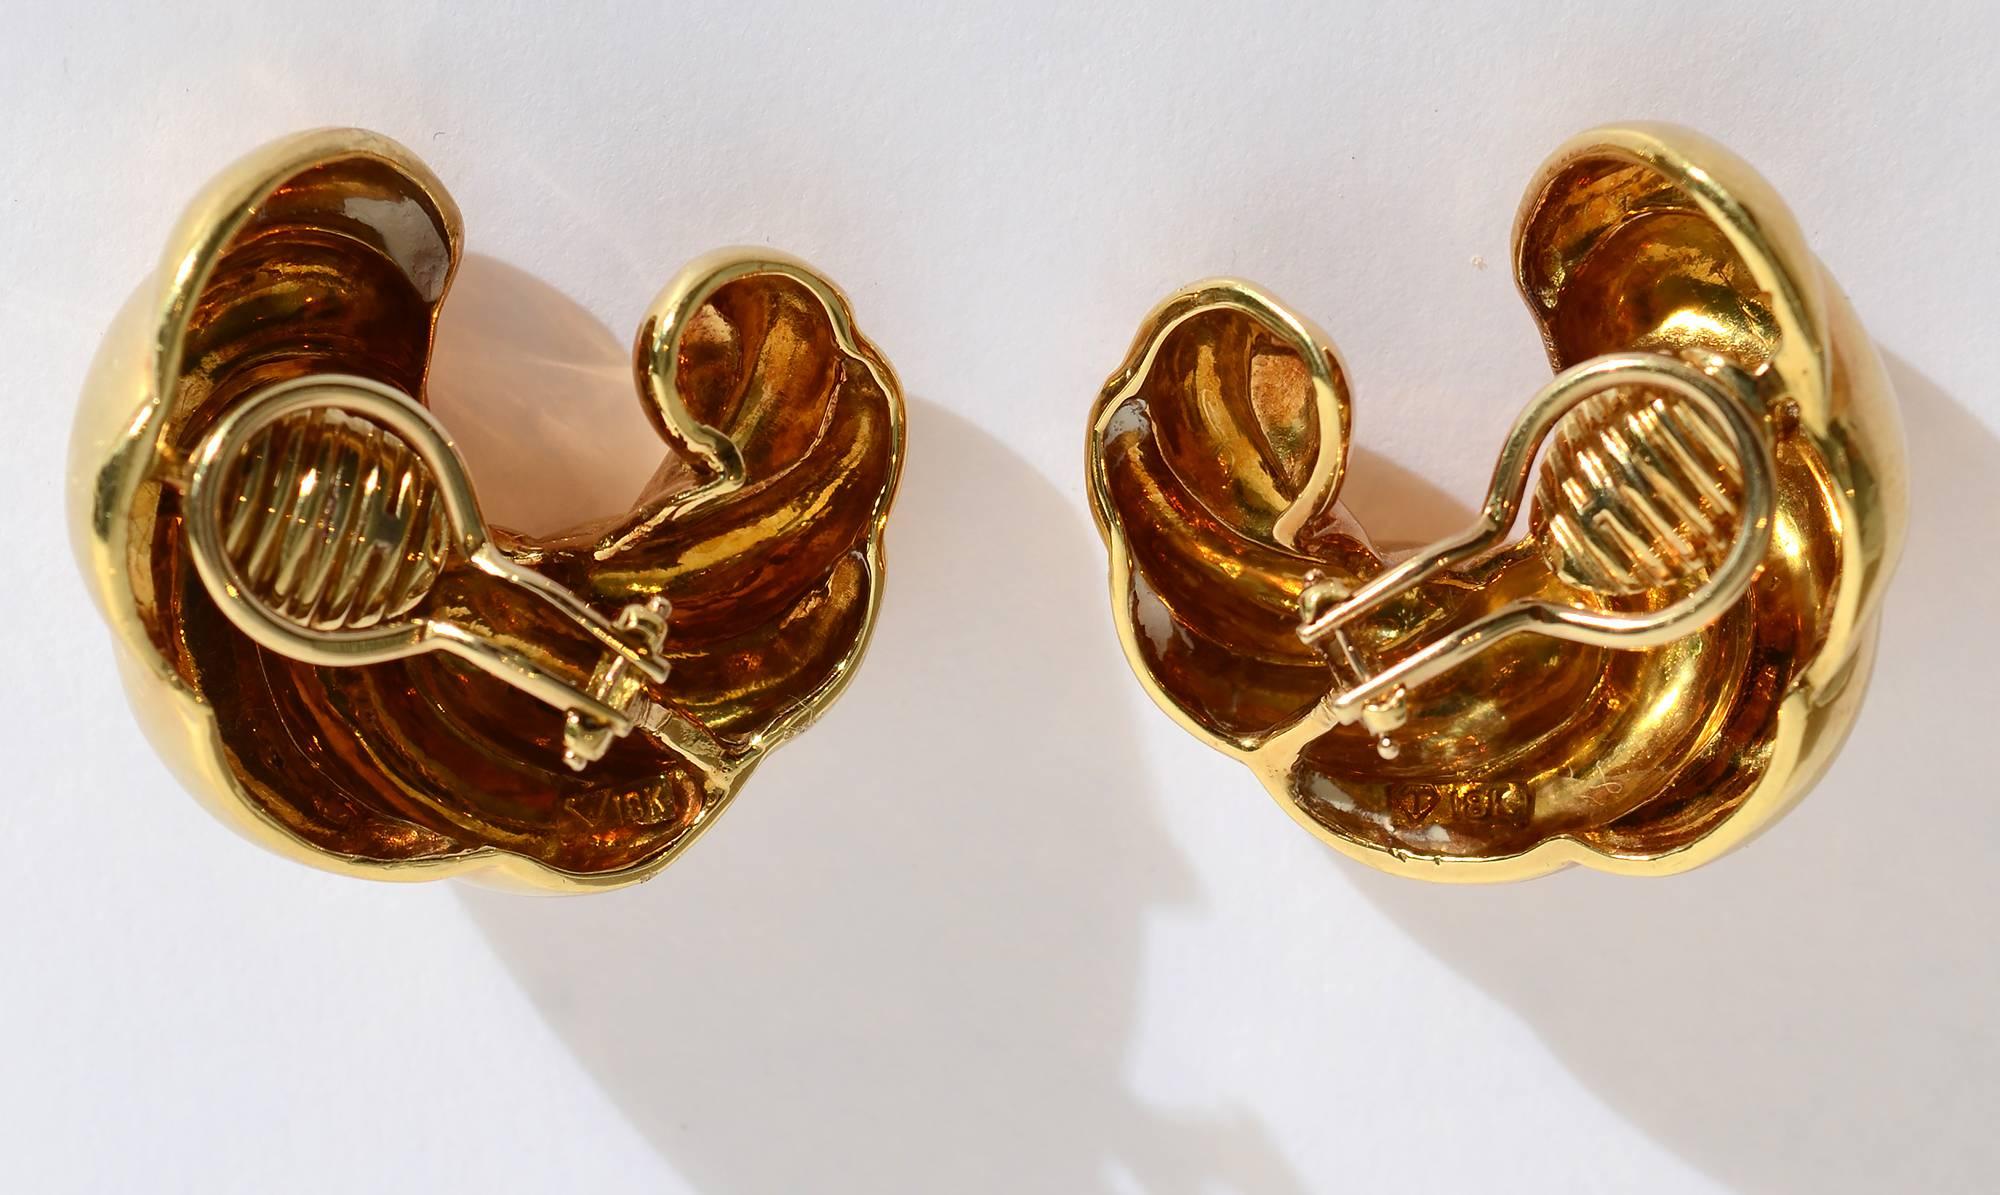 Eighteen karat gold, large crescent shaped earrings with an overall swirled design. The backs are clips that can be changed to posts. The earrings measure 1 1/4